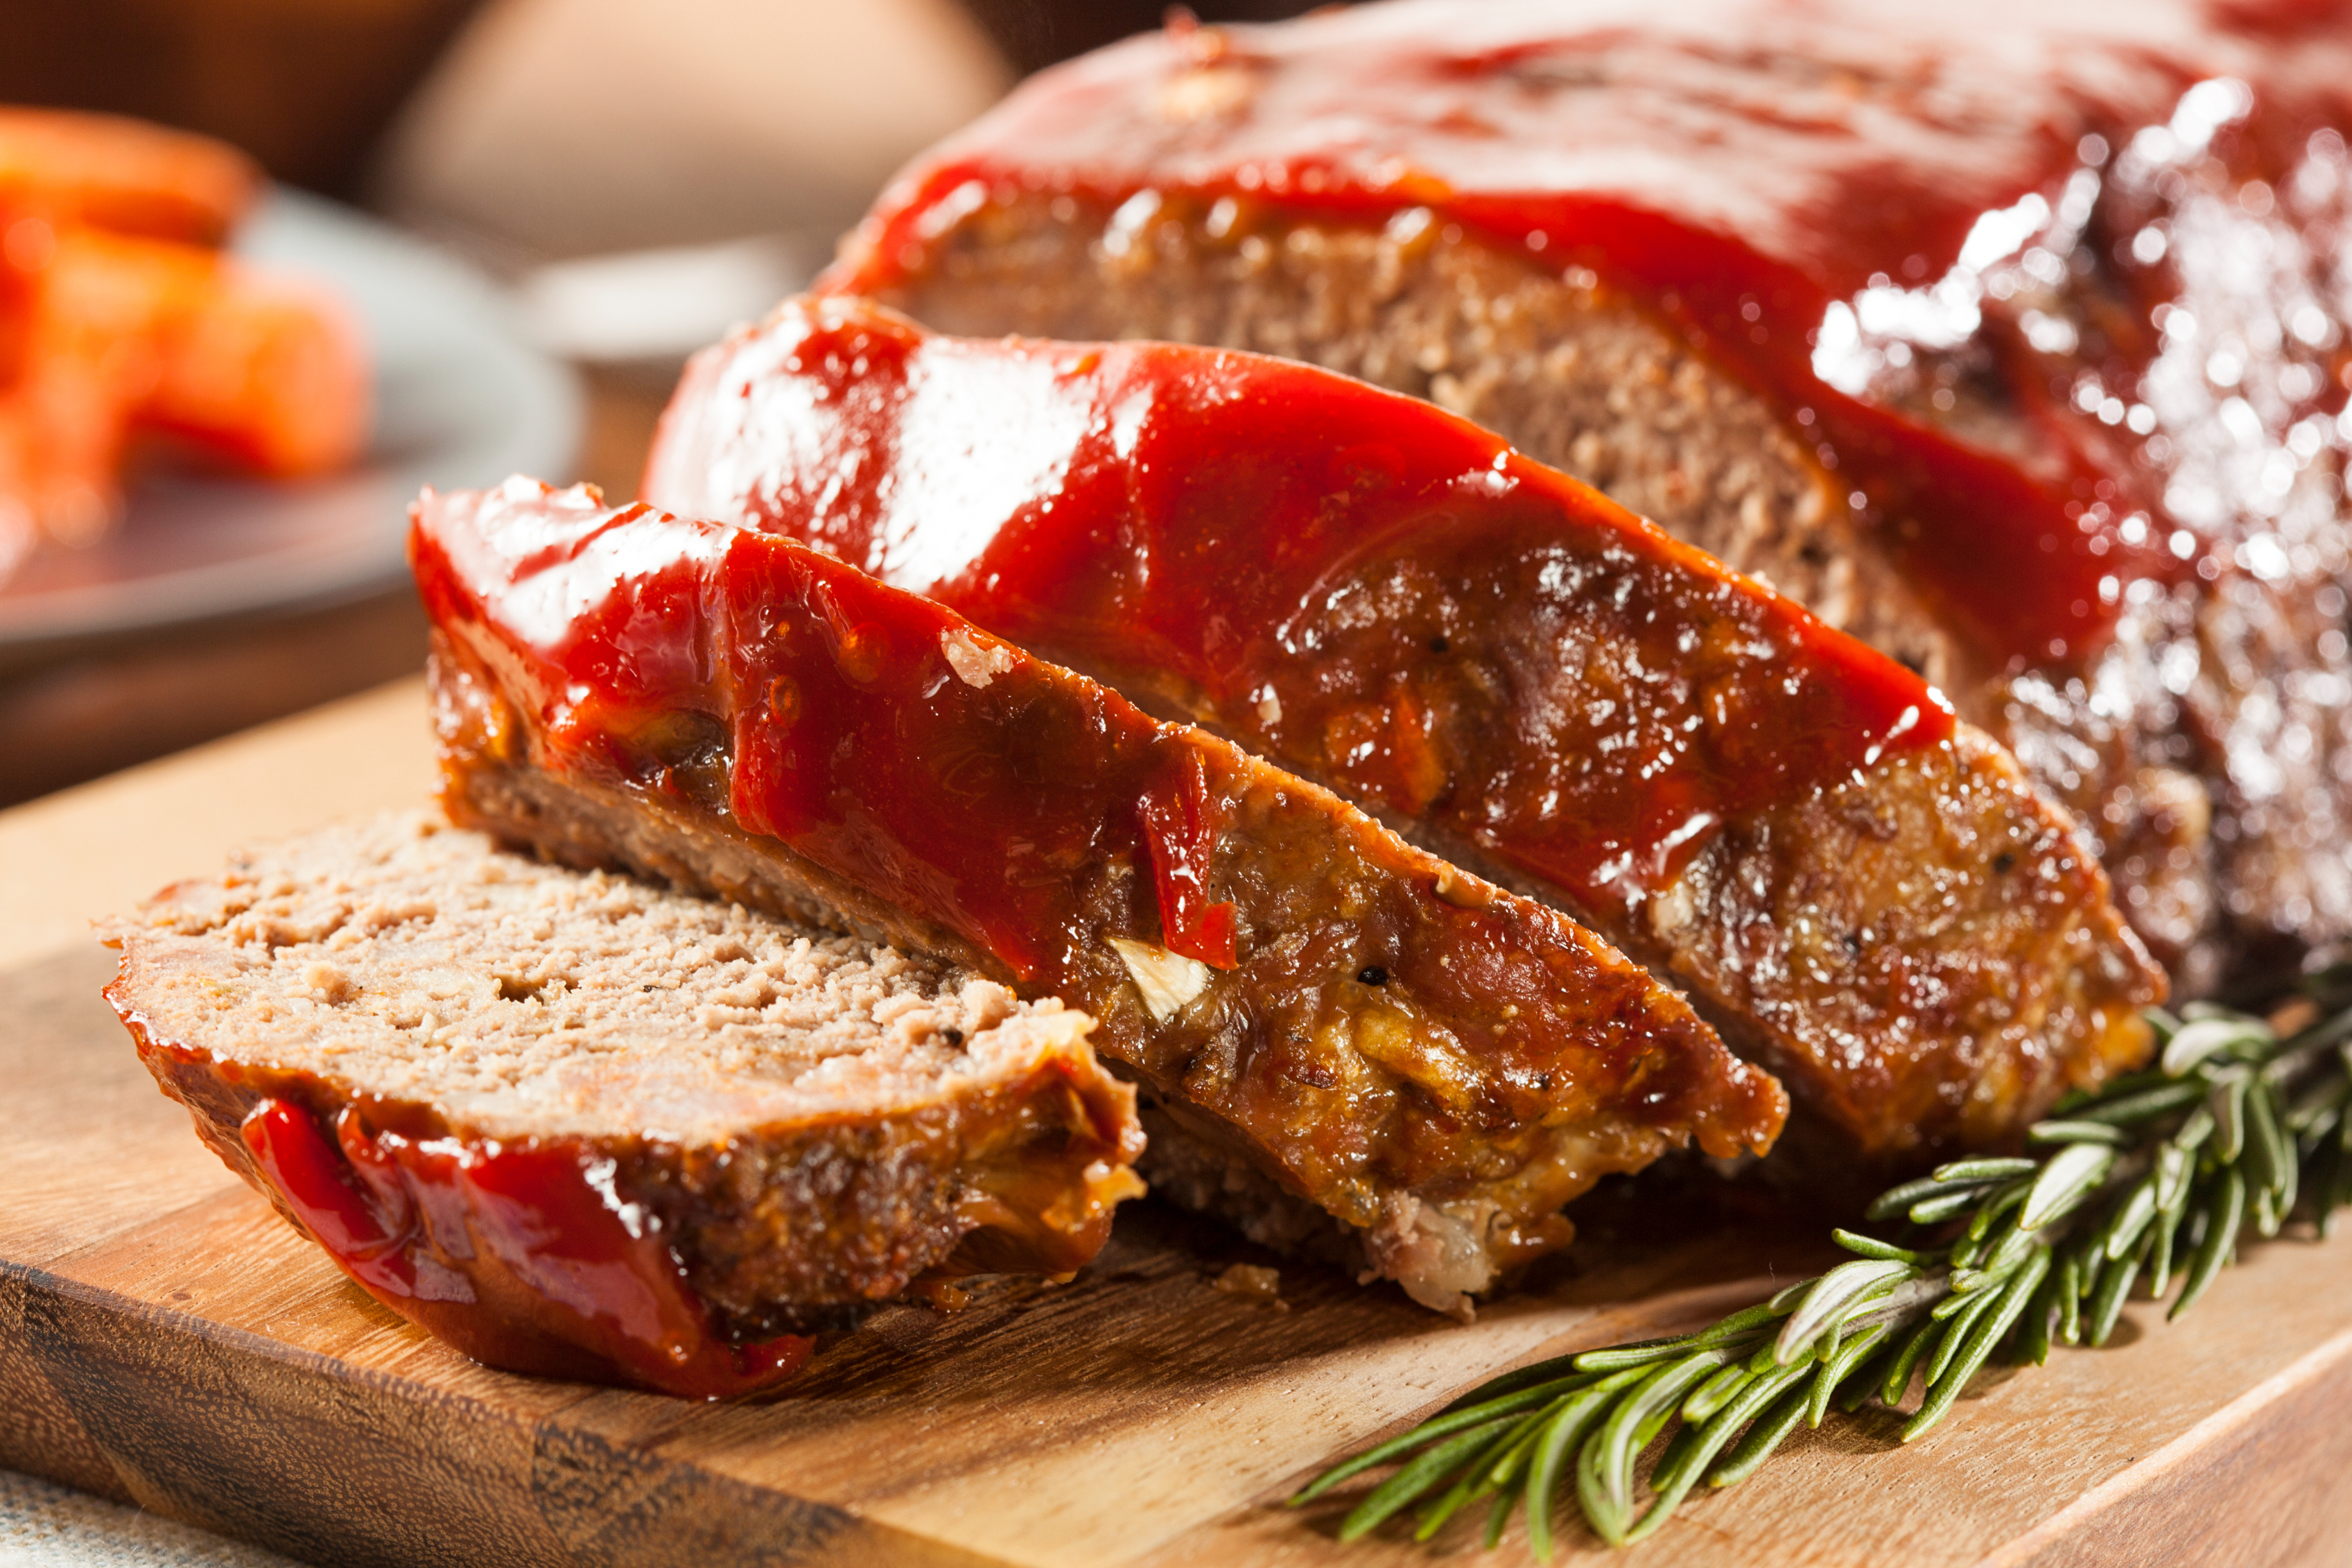 Sliced meatloaf on a wooden board with rosemary sprig, focus on texture